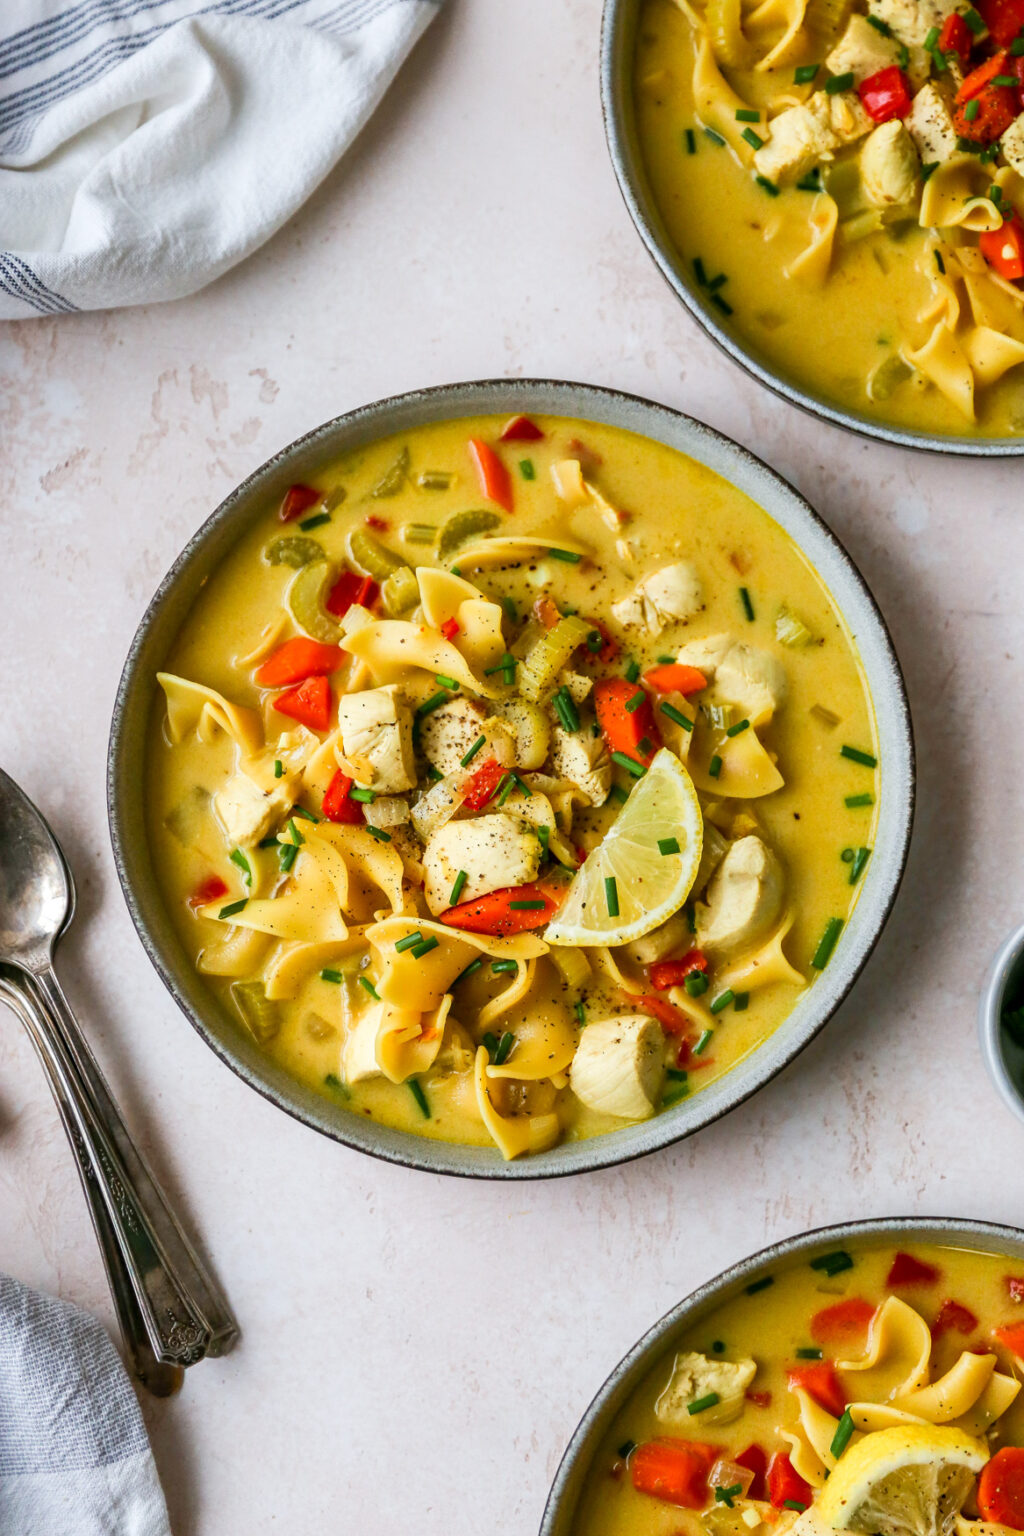 Spicy Coconut Chicken Noodle Soup - Yes to Yolks